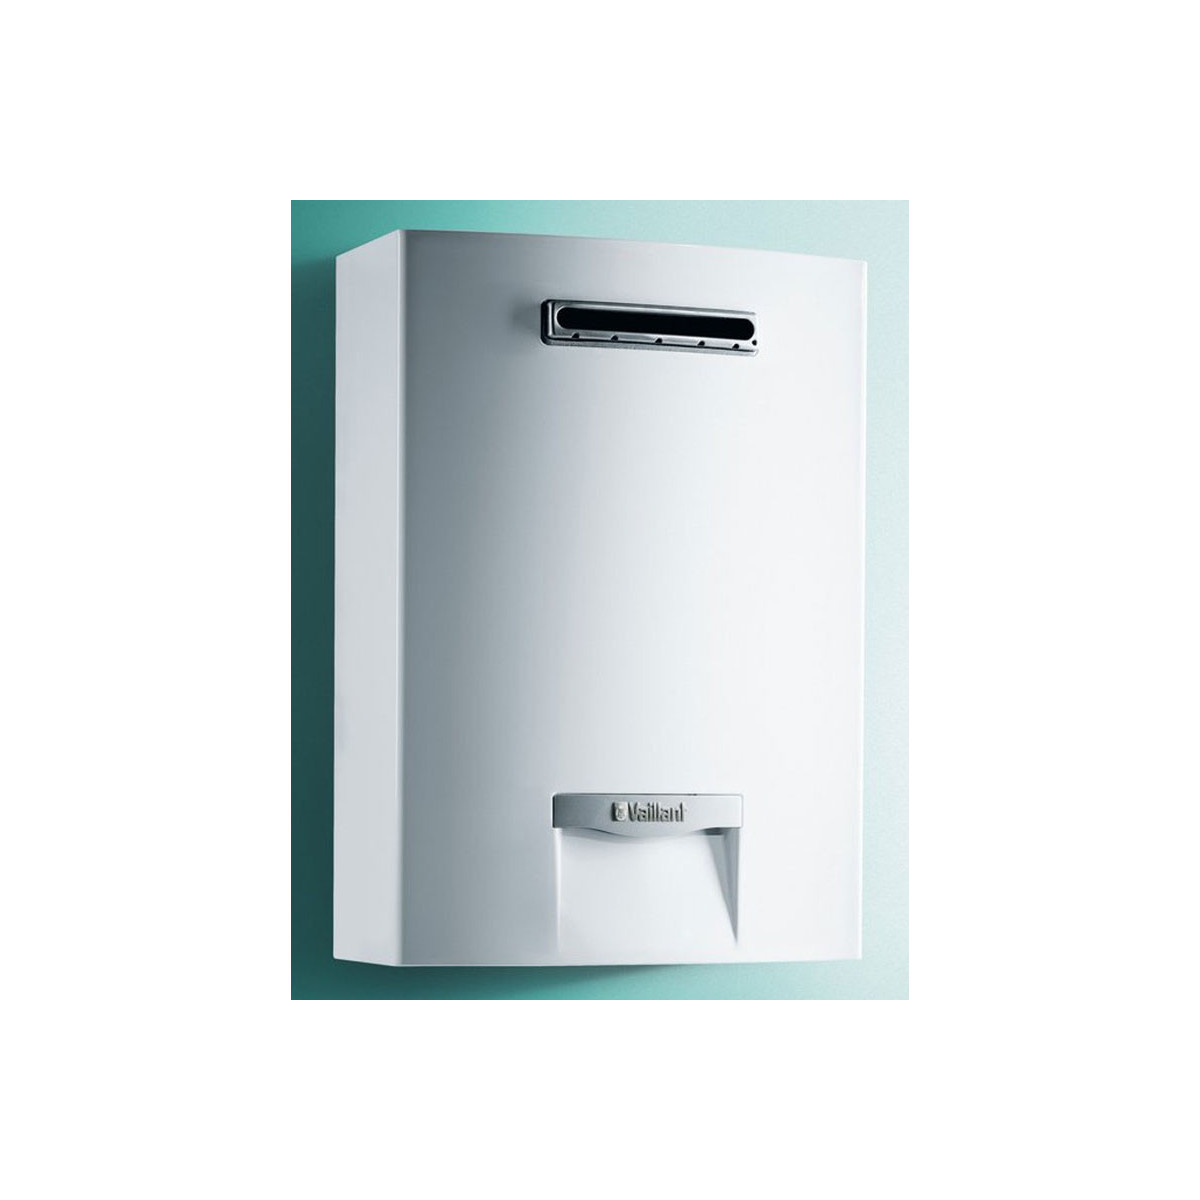 Scaldabagno Vaillant Outsidemag 128/1-5 camera stagna 12 LT Low Nox GPL A